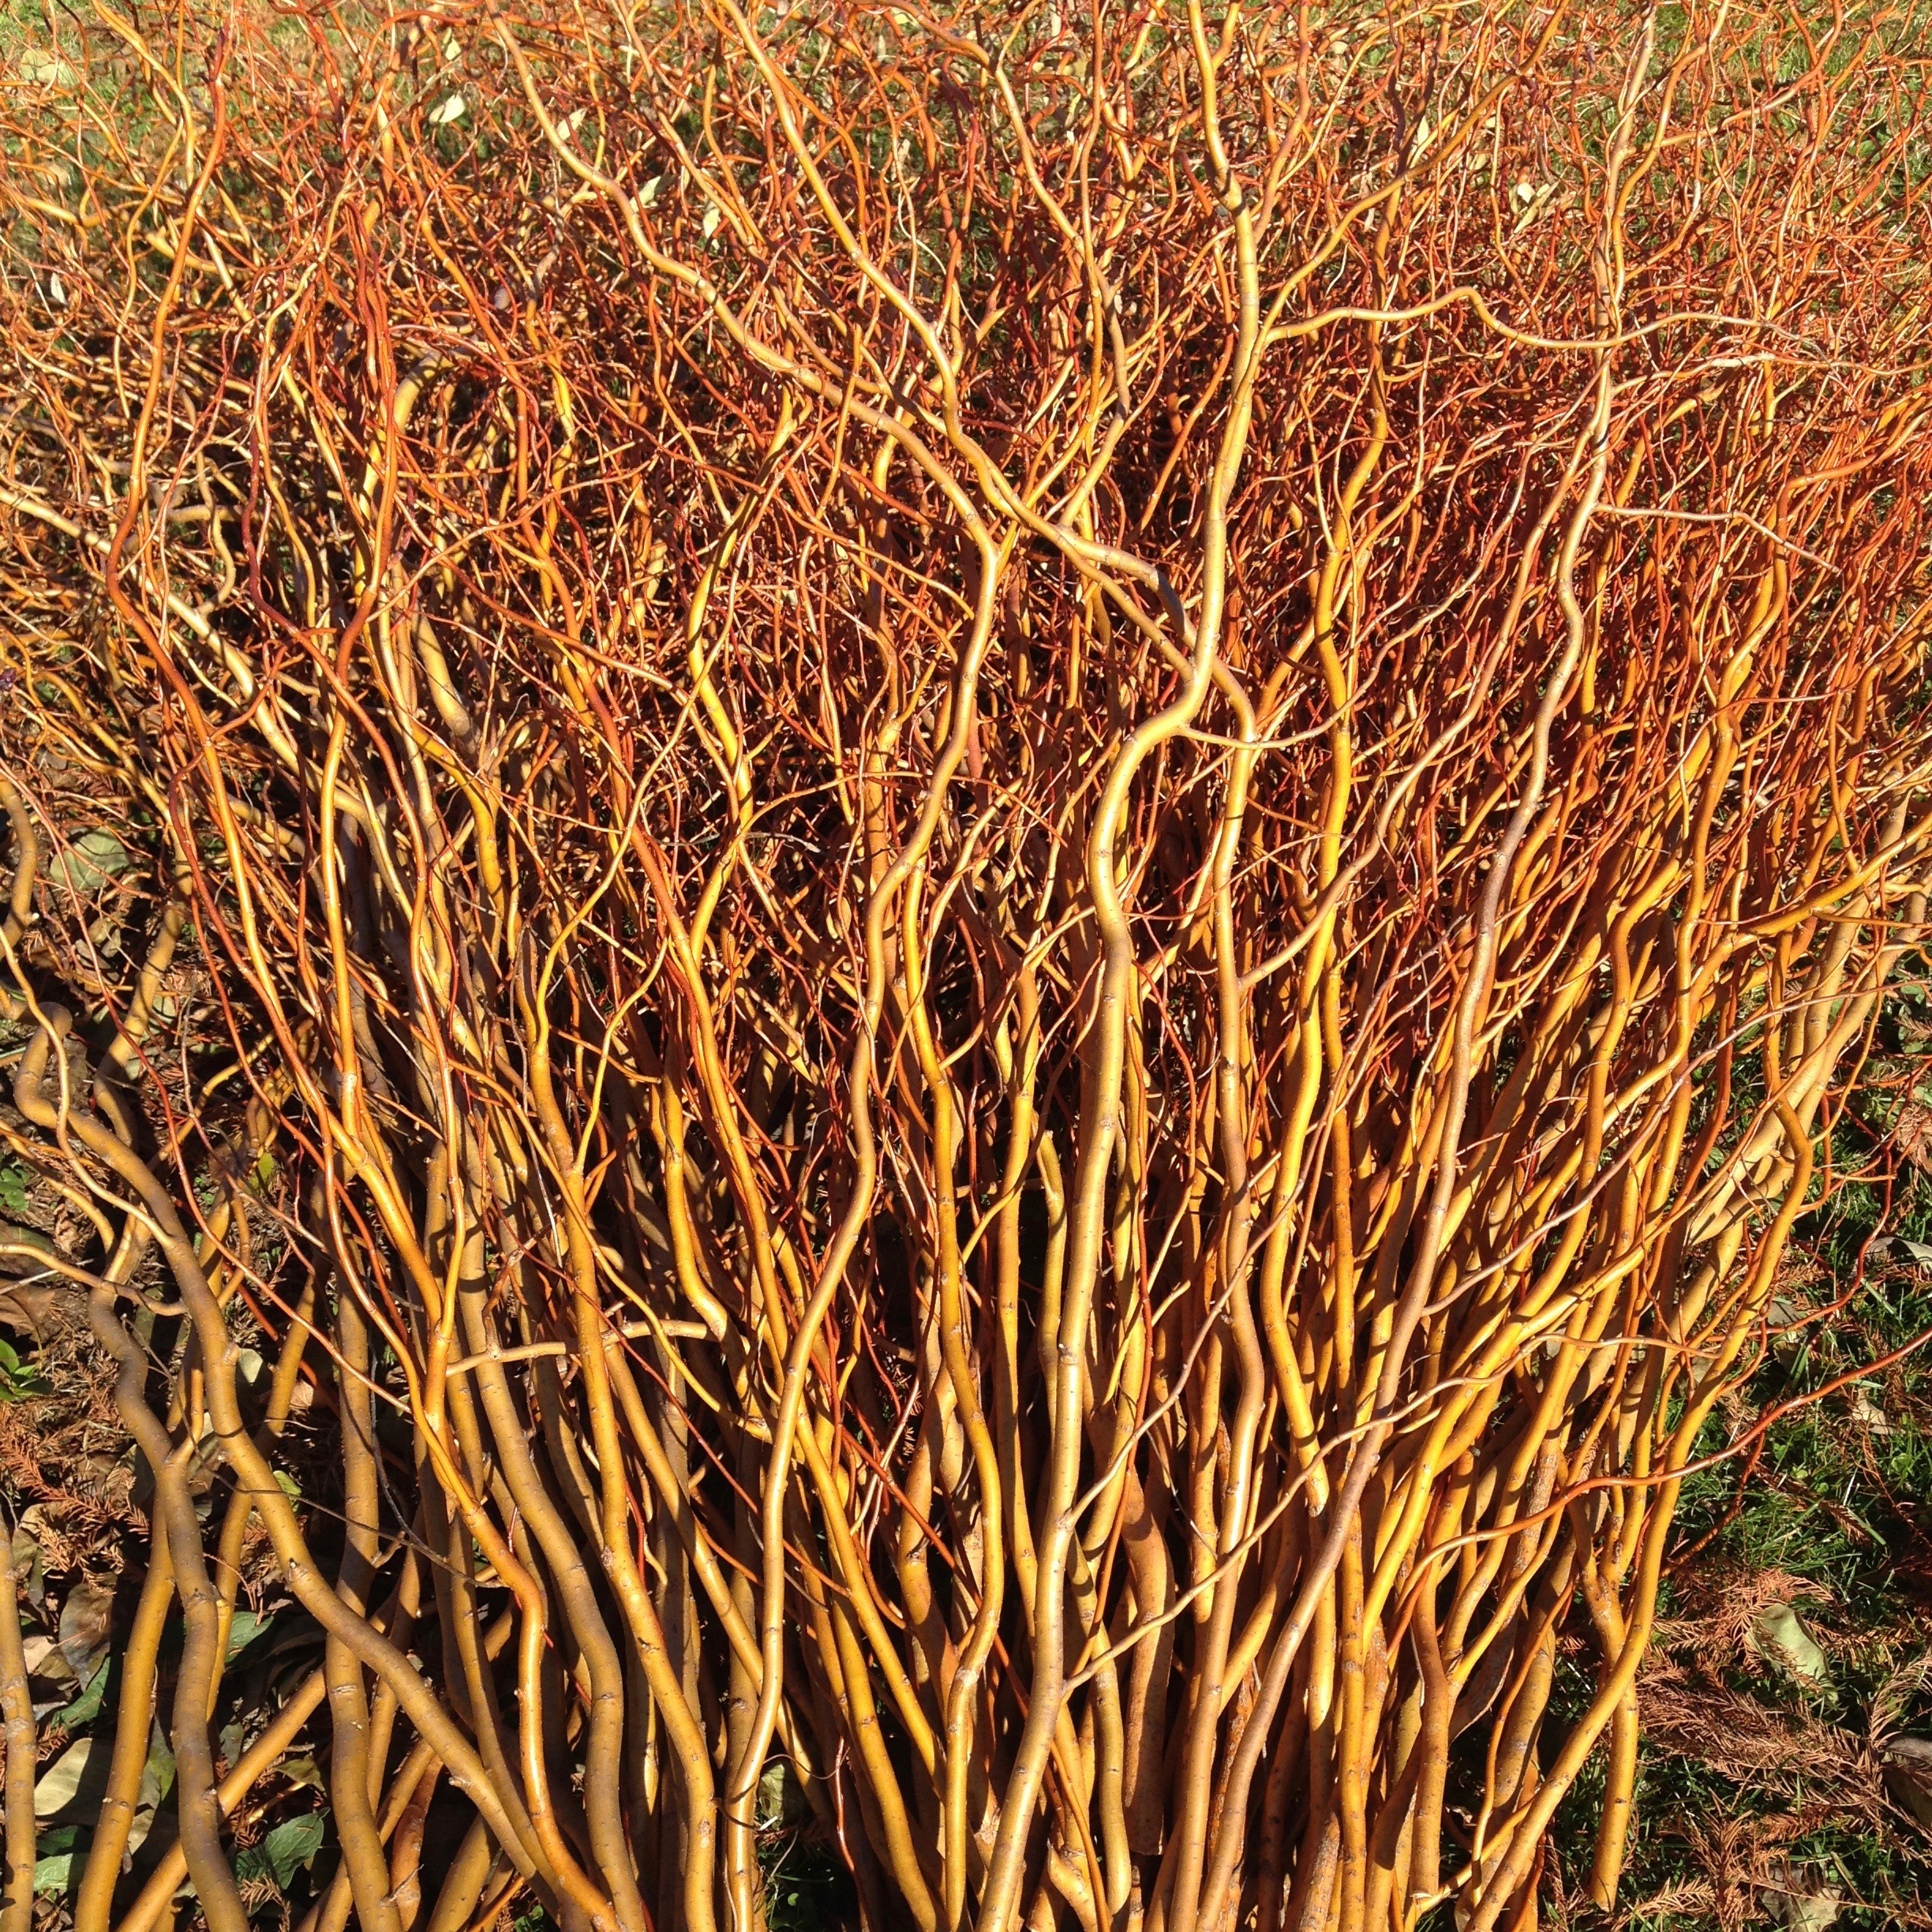 Brown curly willow branches